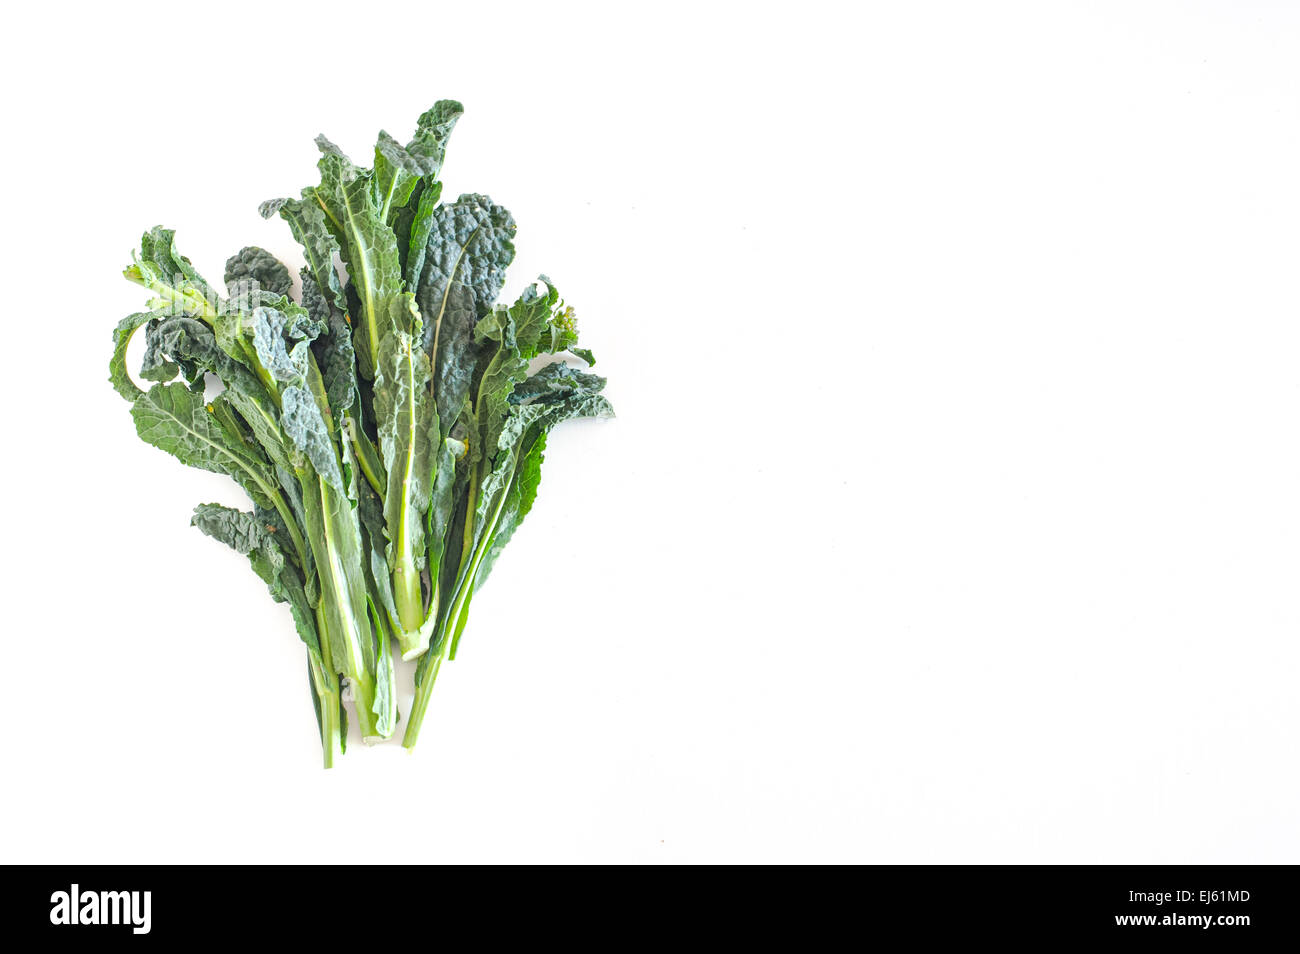 Bunch of green kale on white background, with empty copyspace on the right Stock Photo